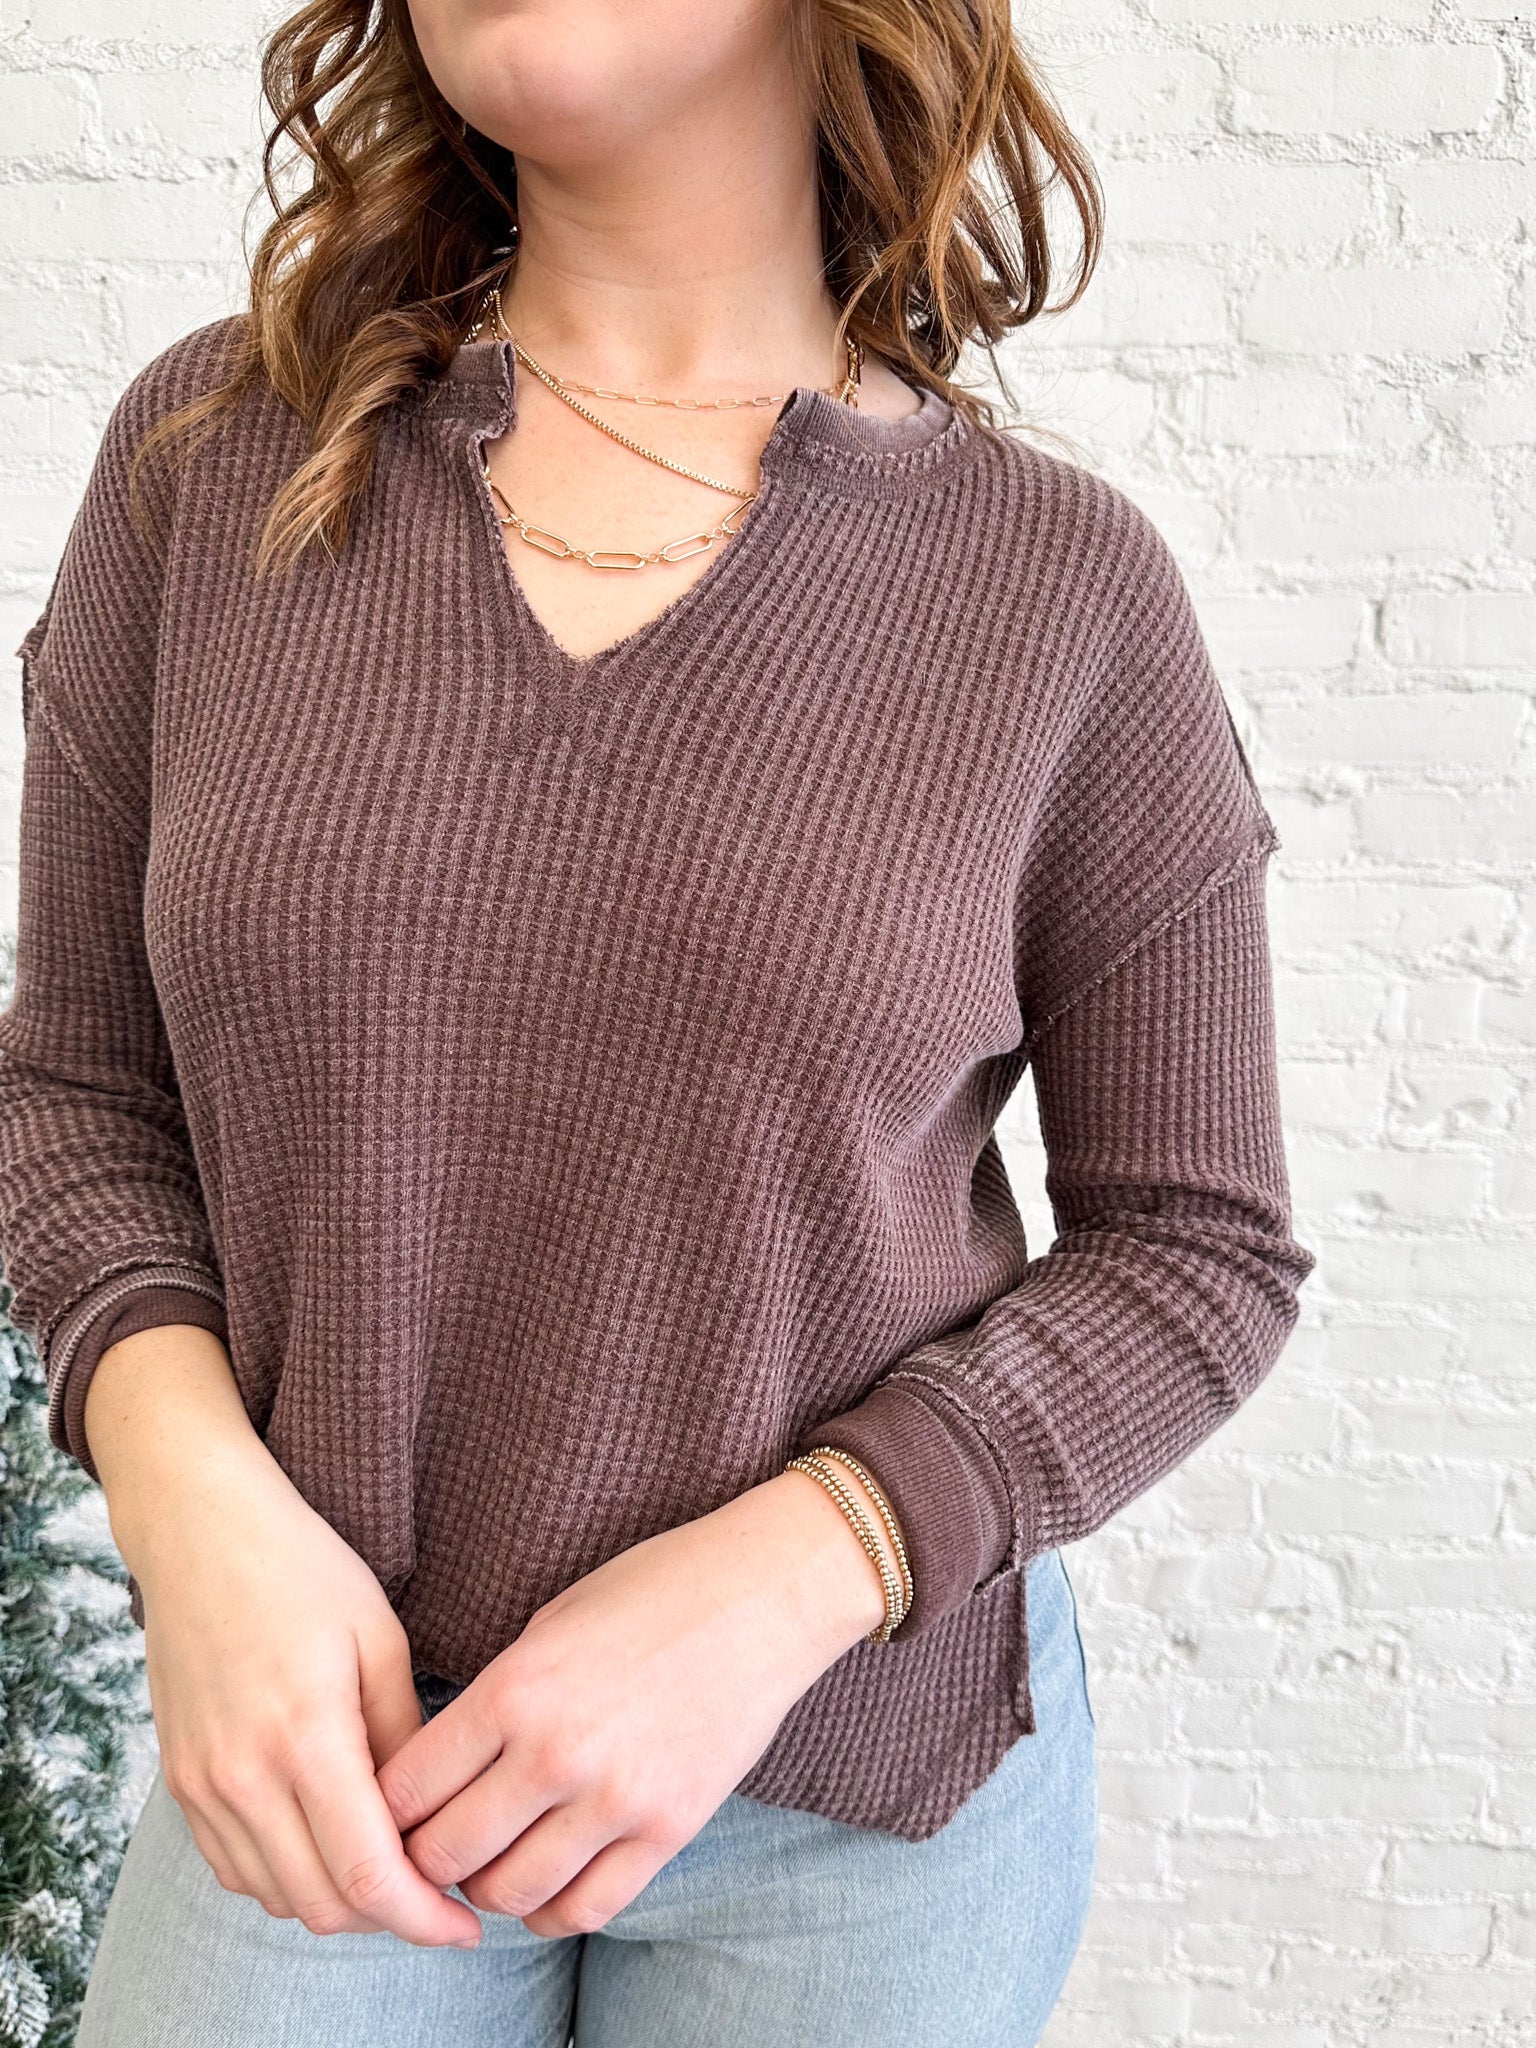 Driftwood Thermal Long Sleeve Top